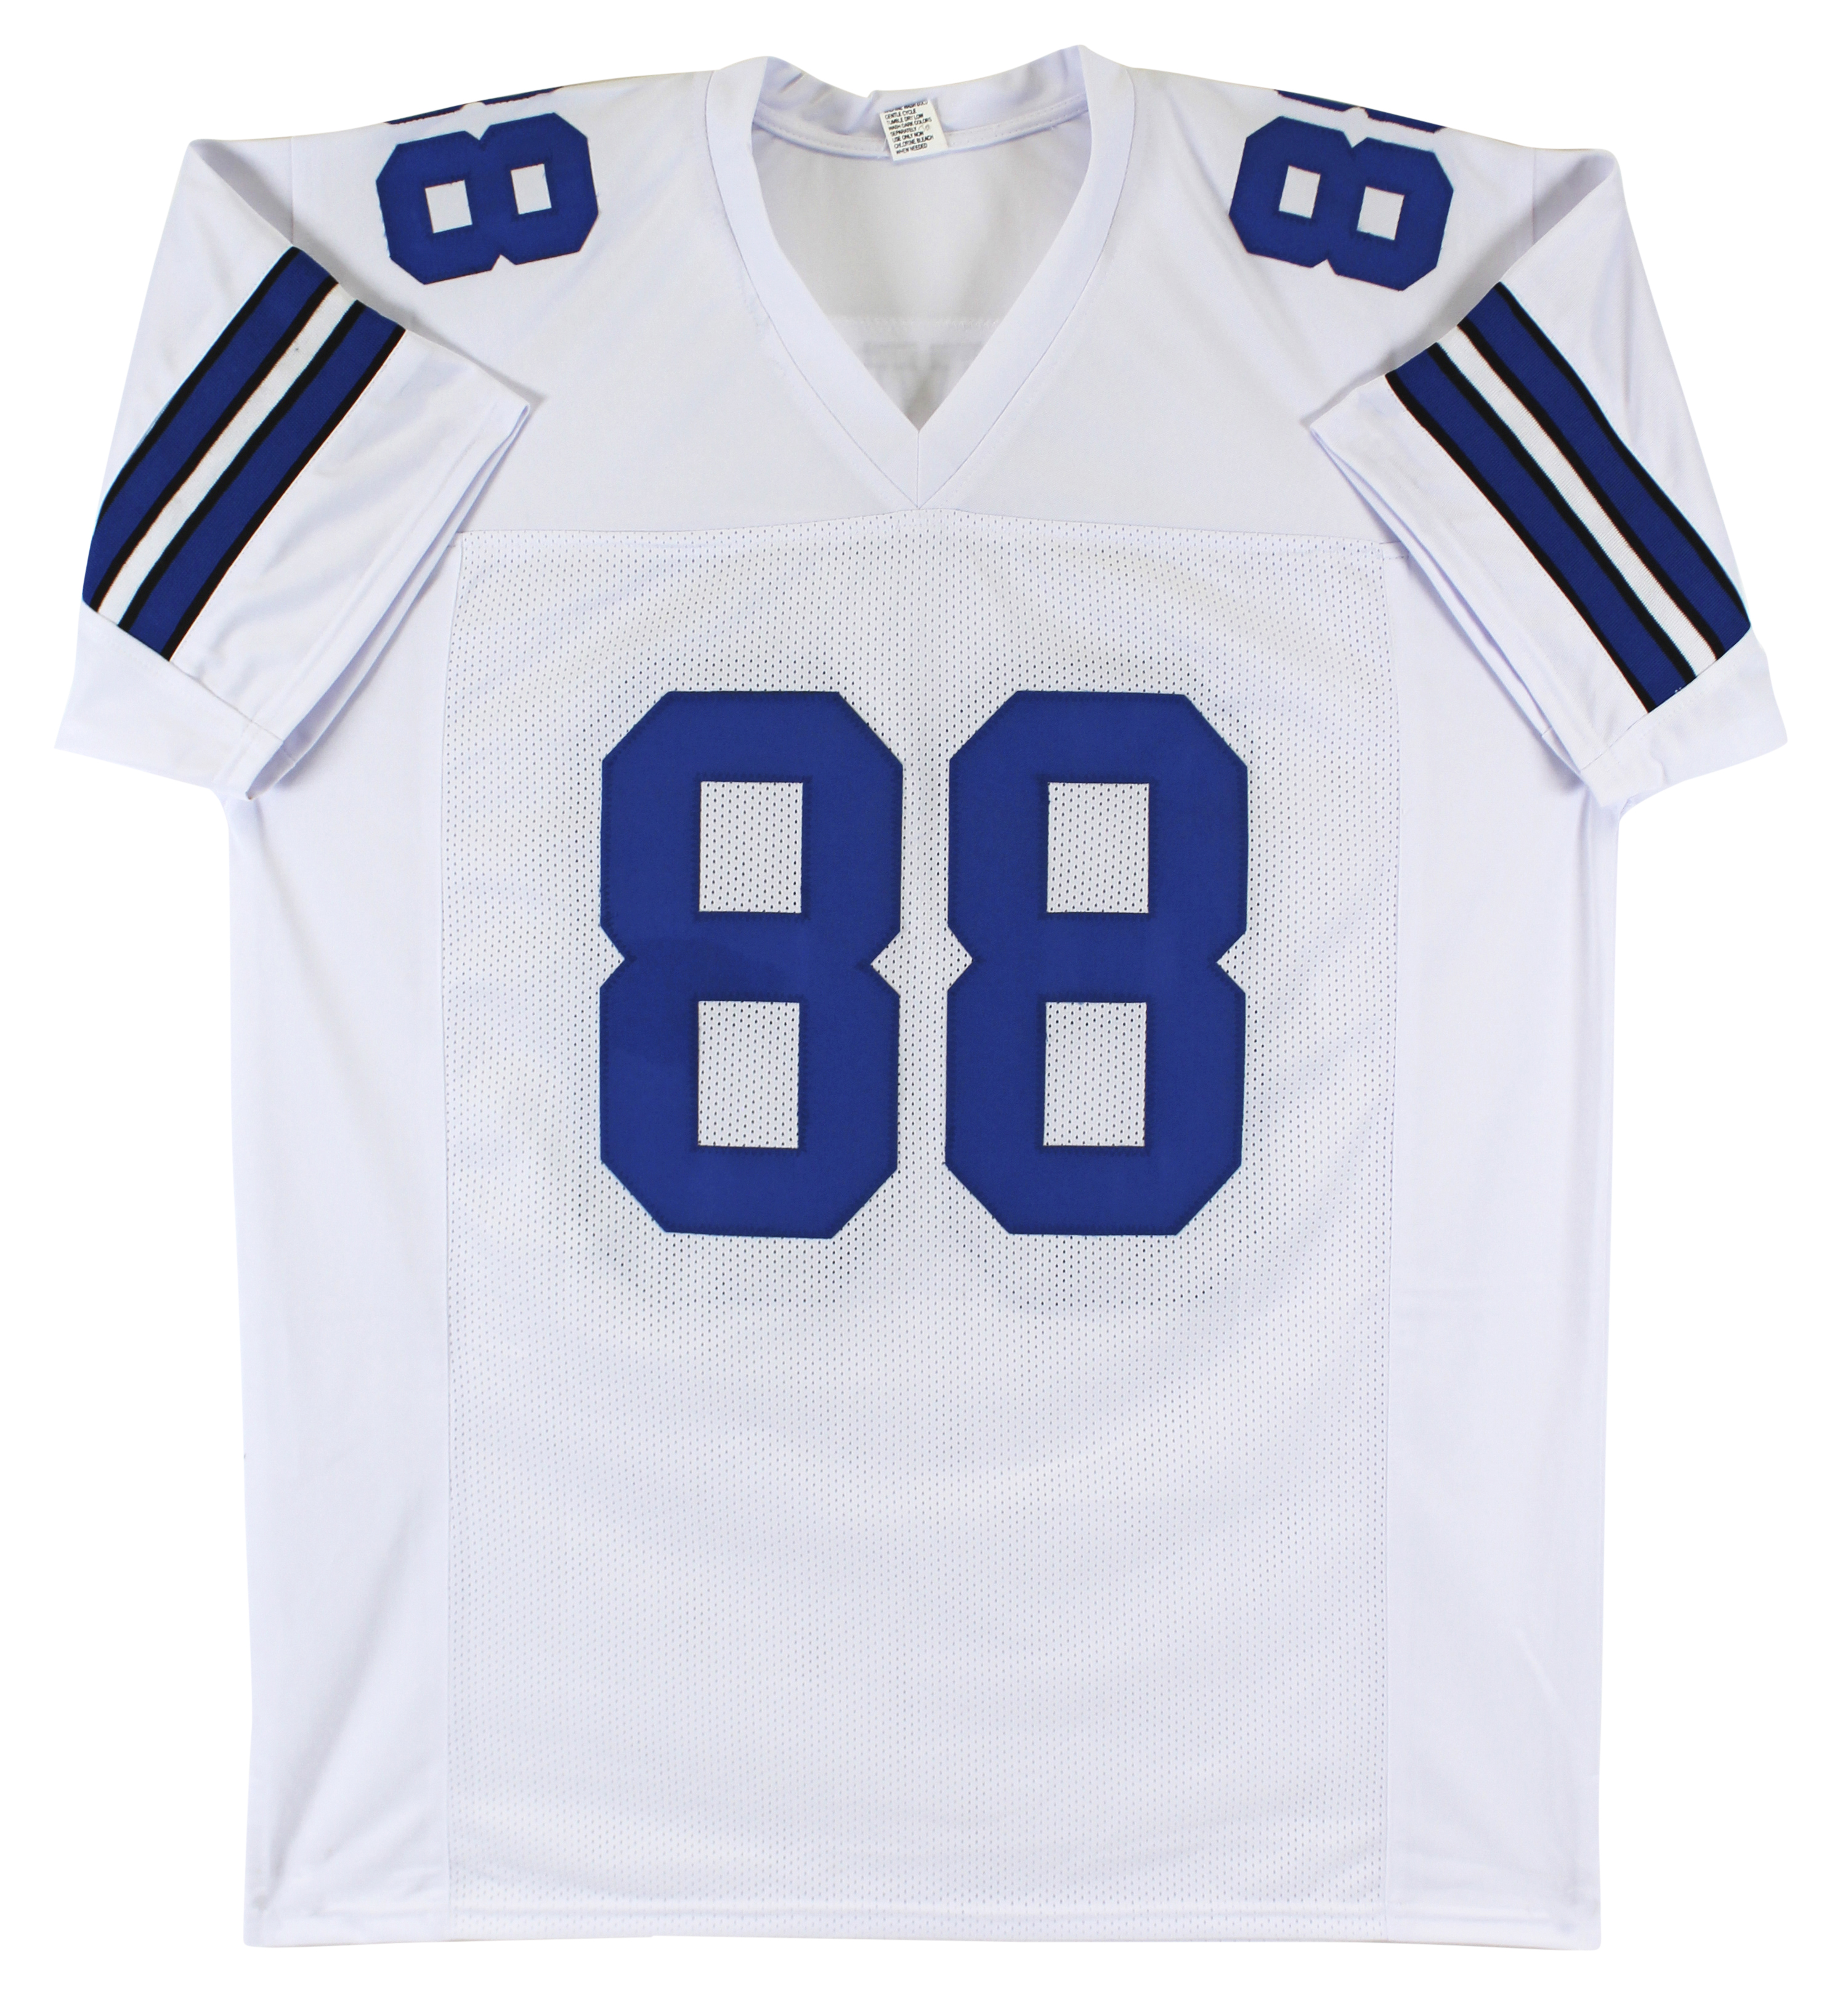 Press Pass Collectibles Michael Irvin Authentic Signed White Pro Style Jersey Autographed BAS Witnessed